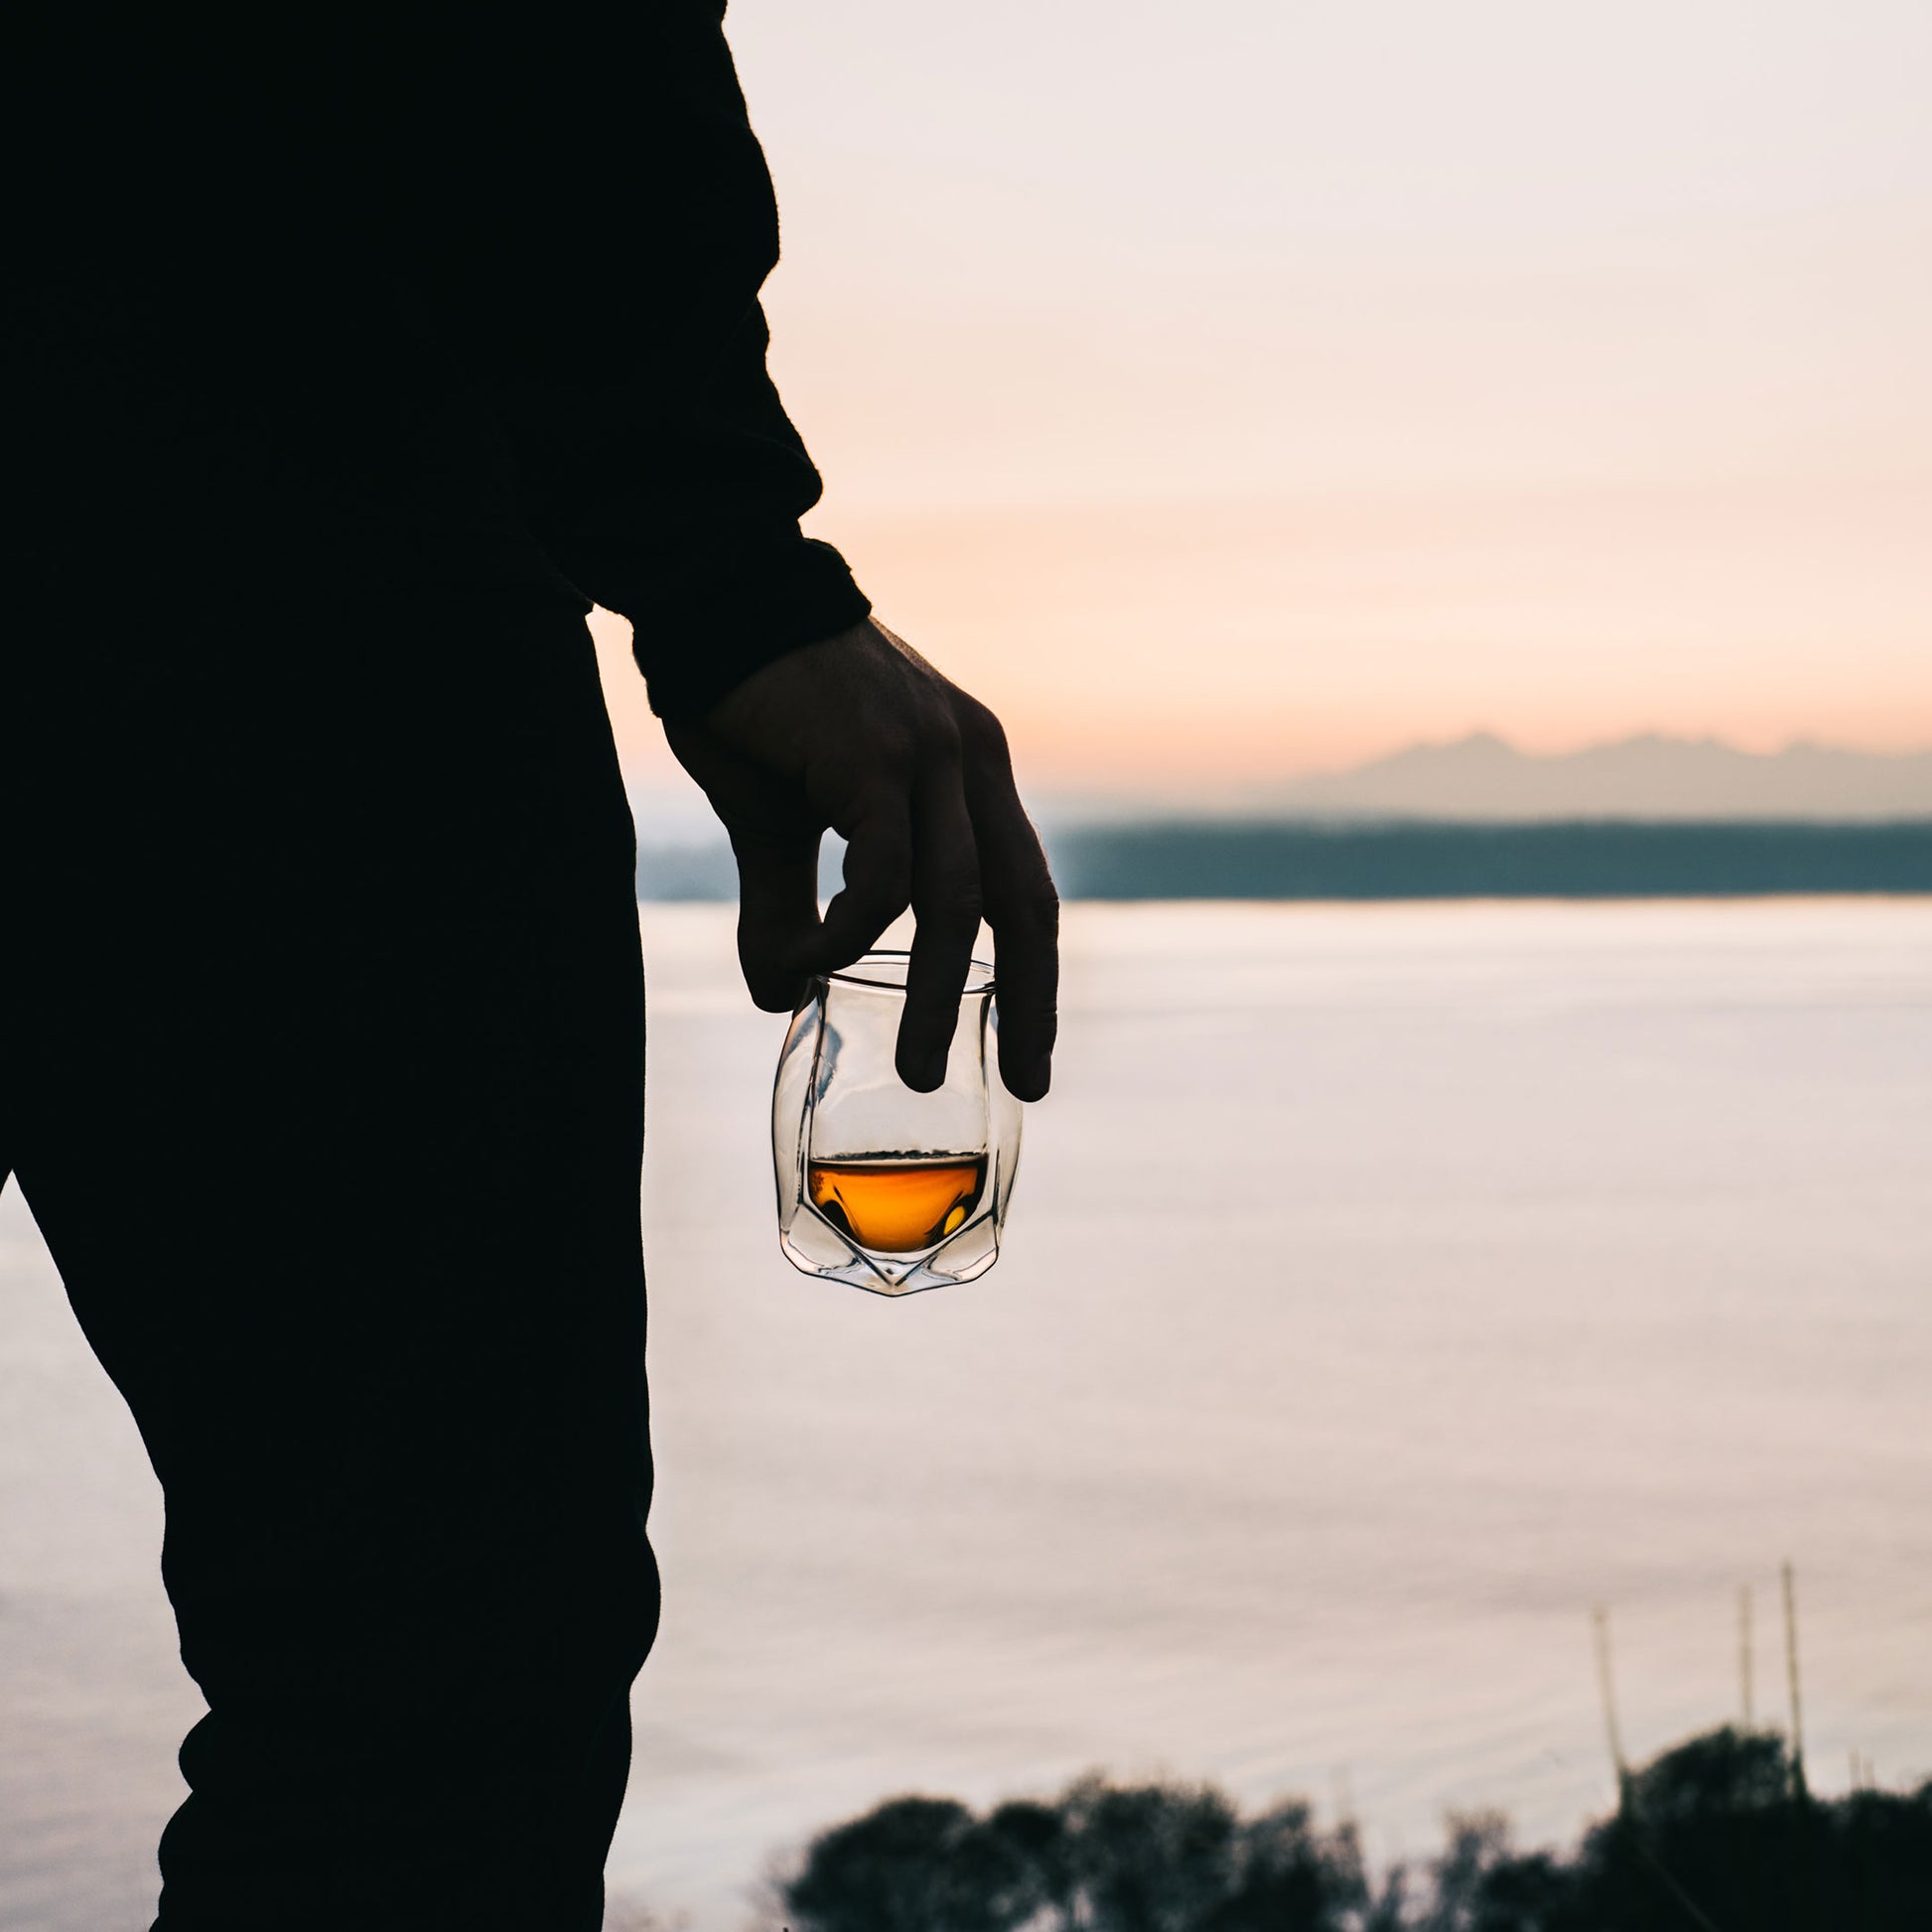 Enjoy your whisky, whiskey, bourbon, or scotch while taking in the sunset